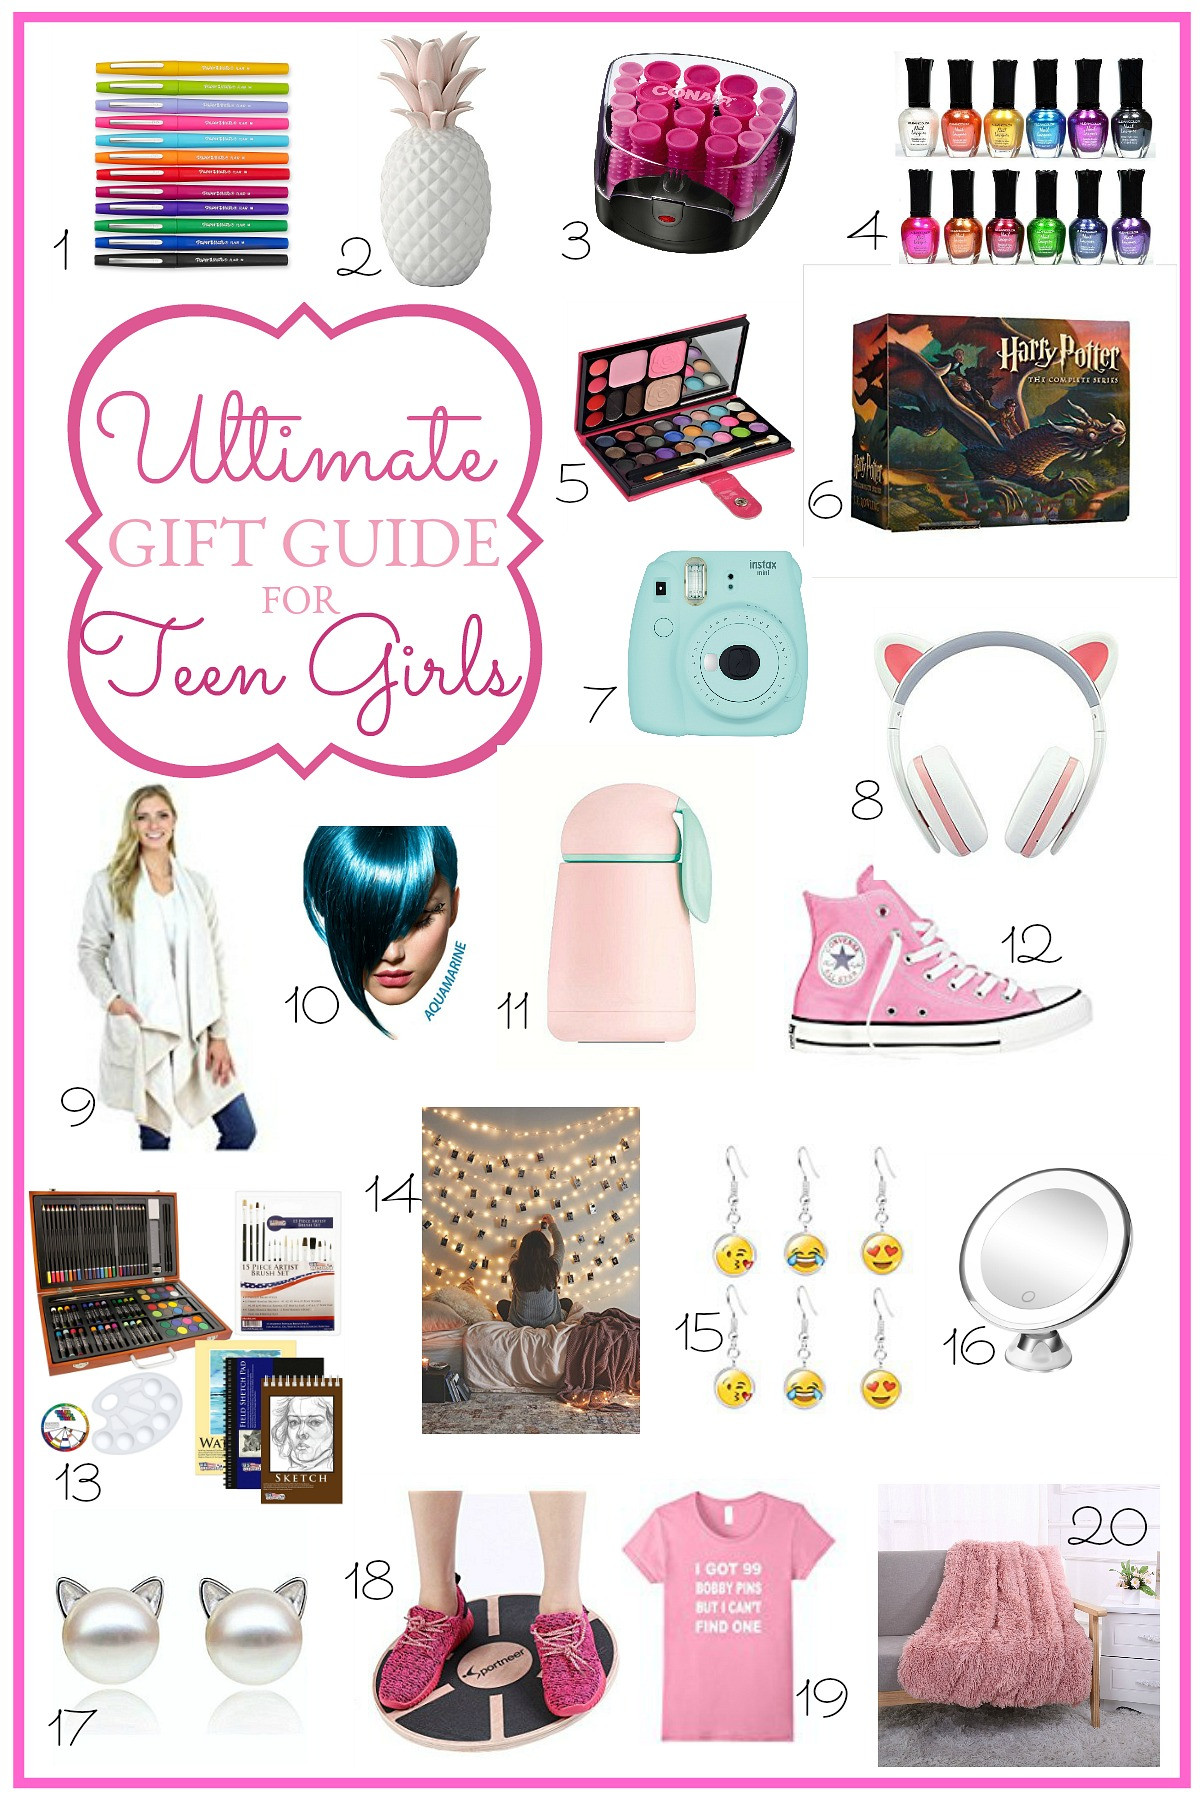 Christmas Gift Ideas For Young Girls
 Ultimate Holiday Gift Guide for Teen Girls